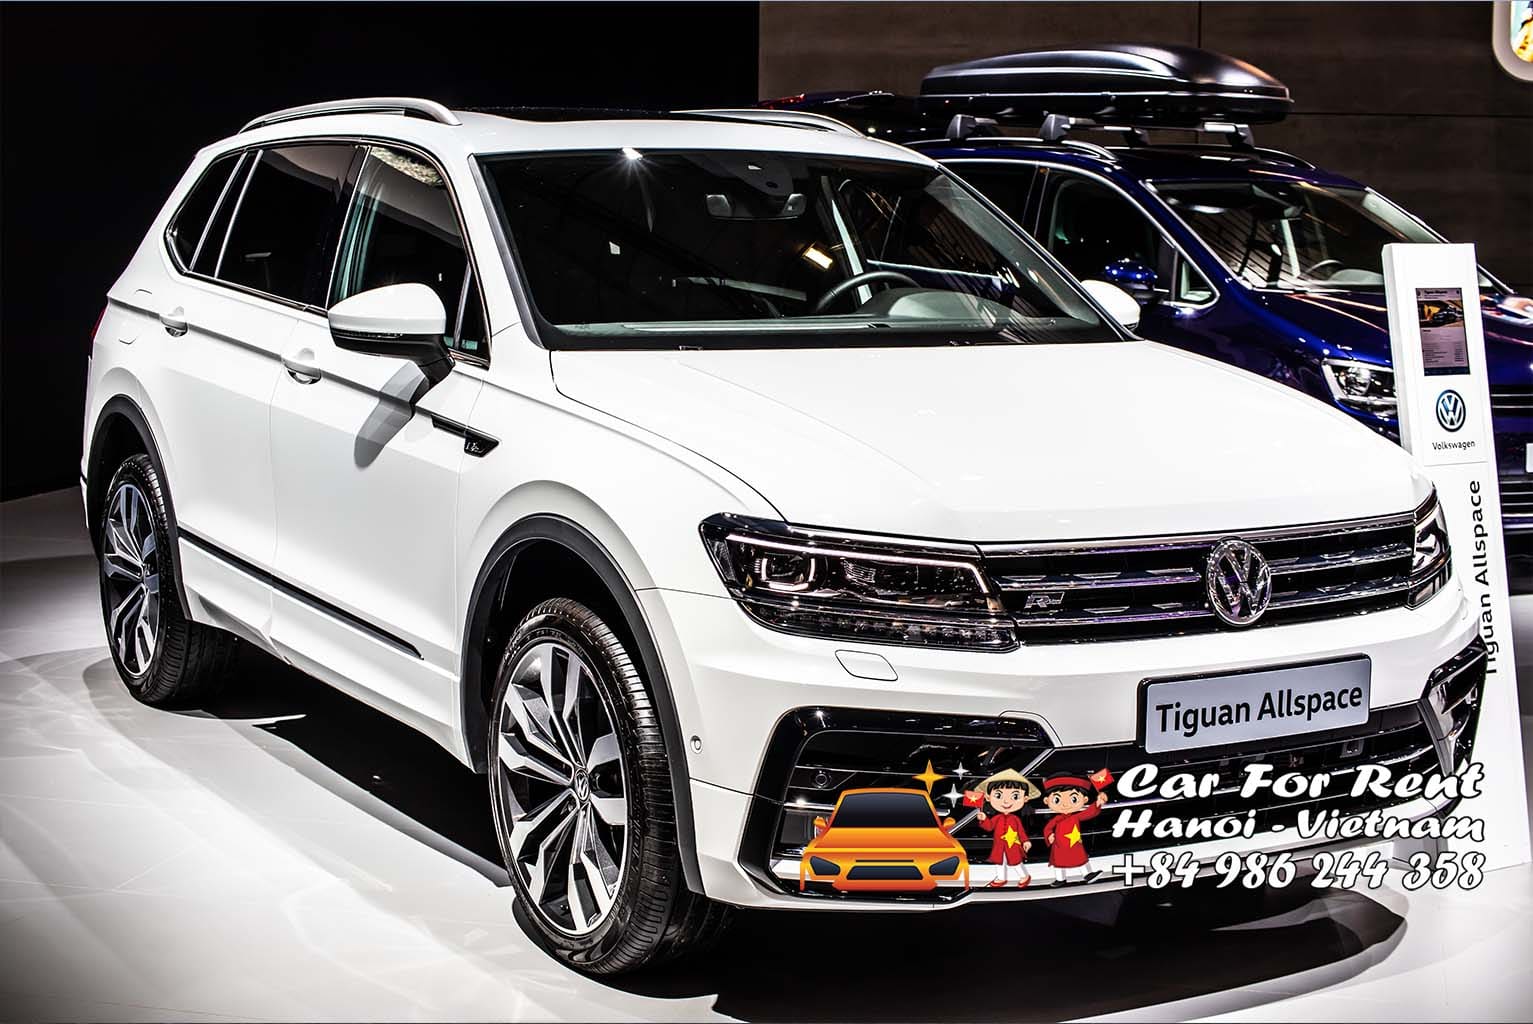 Volkswagen Tiguan Driver and car rental hanoi A Convenient and Comfortable Way to Explore the City